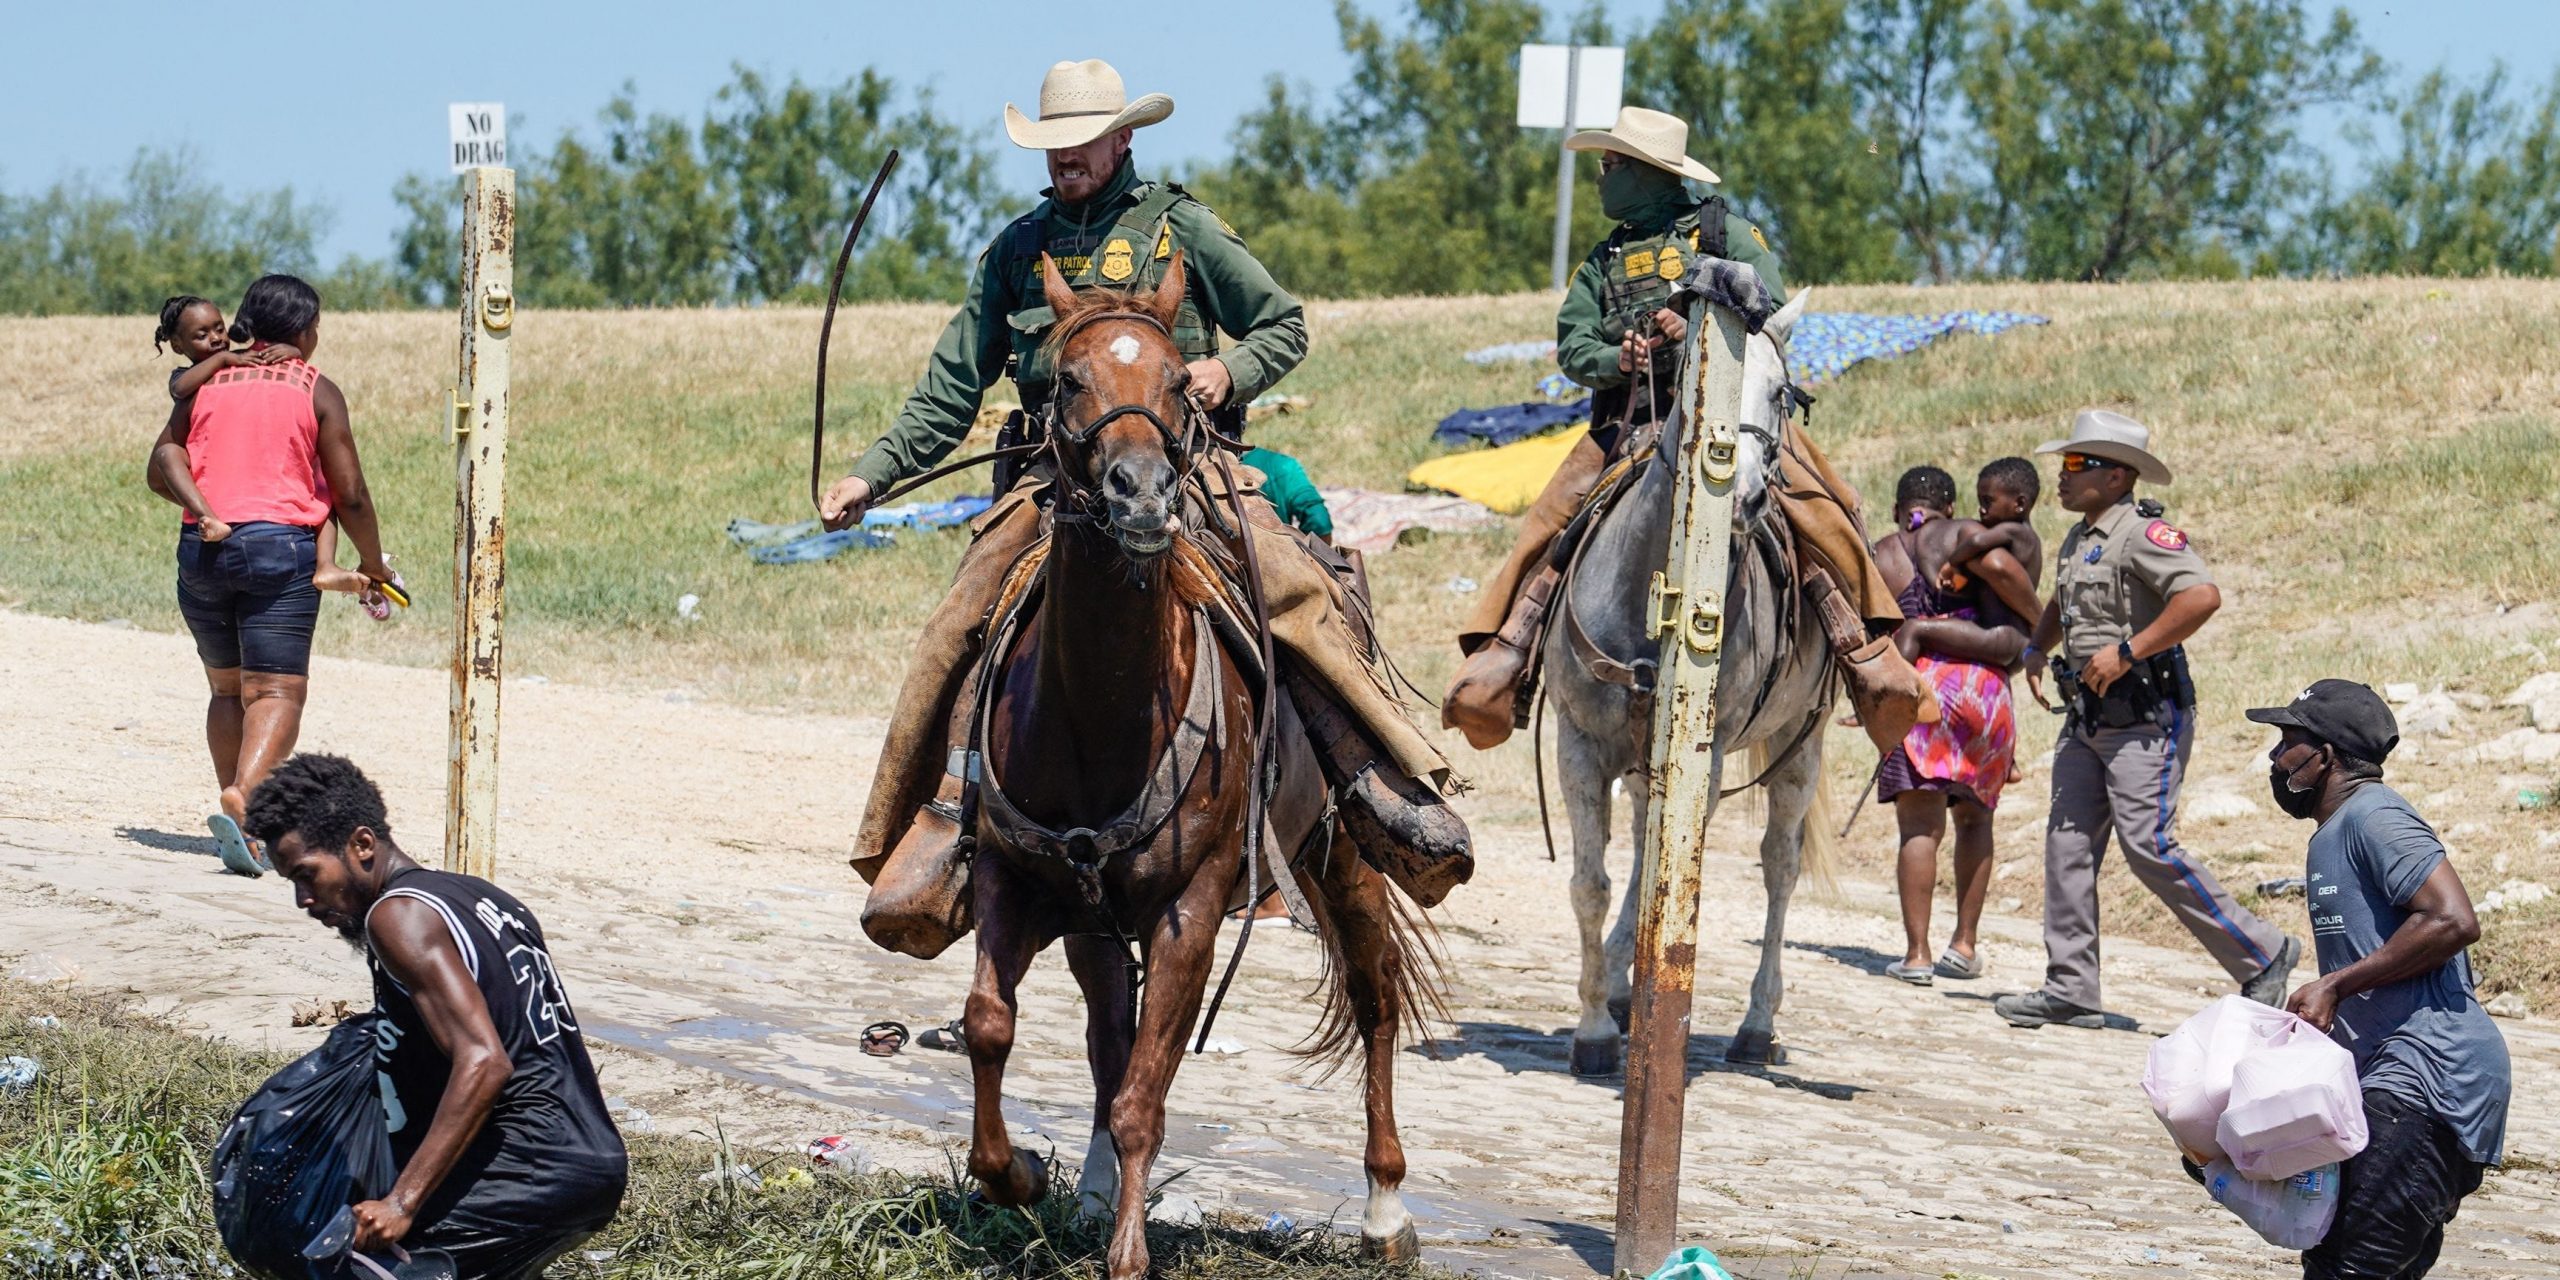 United States Border Patrol agents on horseback try to stop Haitian migrants from entering an encampment on the banks of the Rio Grande near the Acuna Del Rio International Bridge in Del Rio, Texas on September 19, 2021. - US law enforcement are attempting to close off crossing points along the Rio Grande river where migrants cross to get food and water, which is scarce in the encampment. The United States said Saturday it would ramp up deportation flights for thousands of migrants who flooded into the Texas border city of Del Rio, as authorities scramble to alleviate a burgeoning crisis for President Joe Biden's administration.